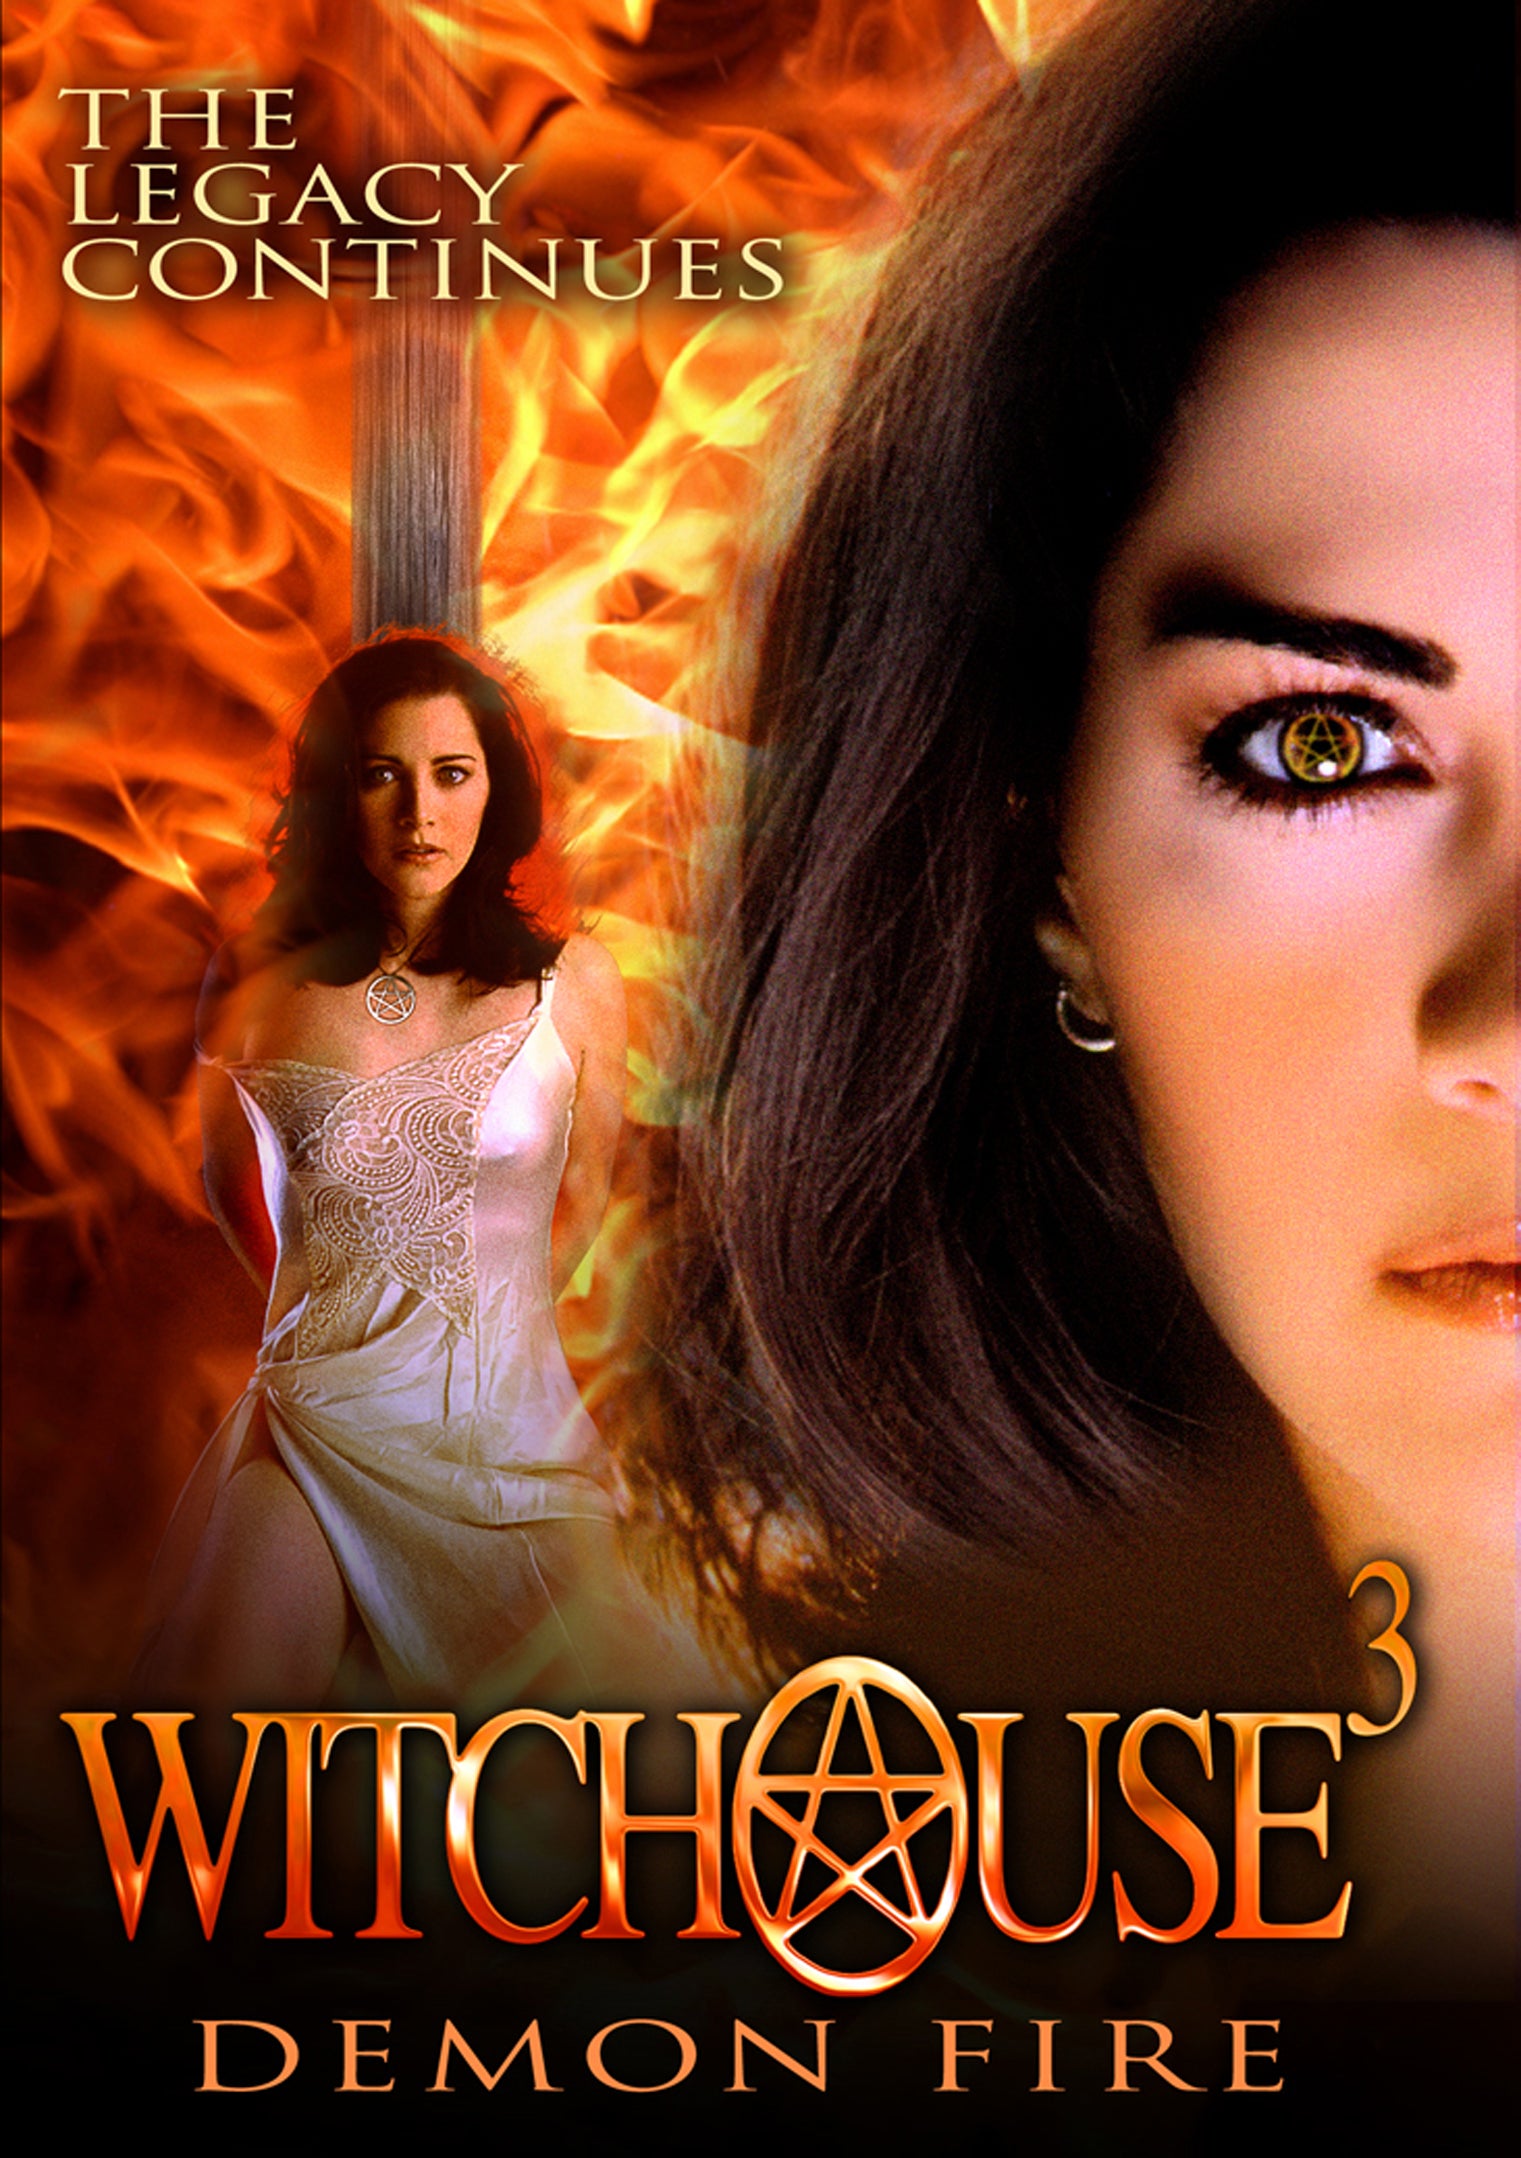 WITCHOUSE 3: DEMON FIRE DVD